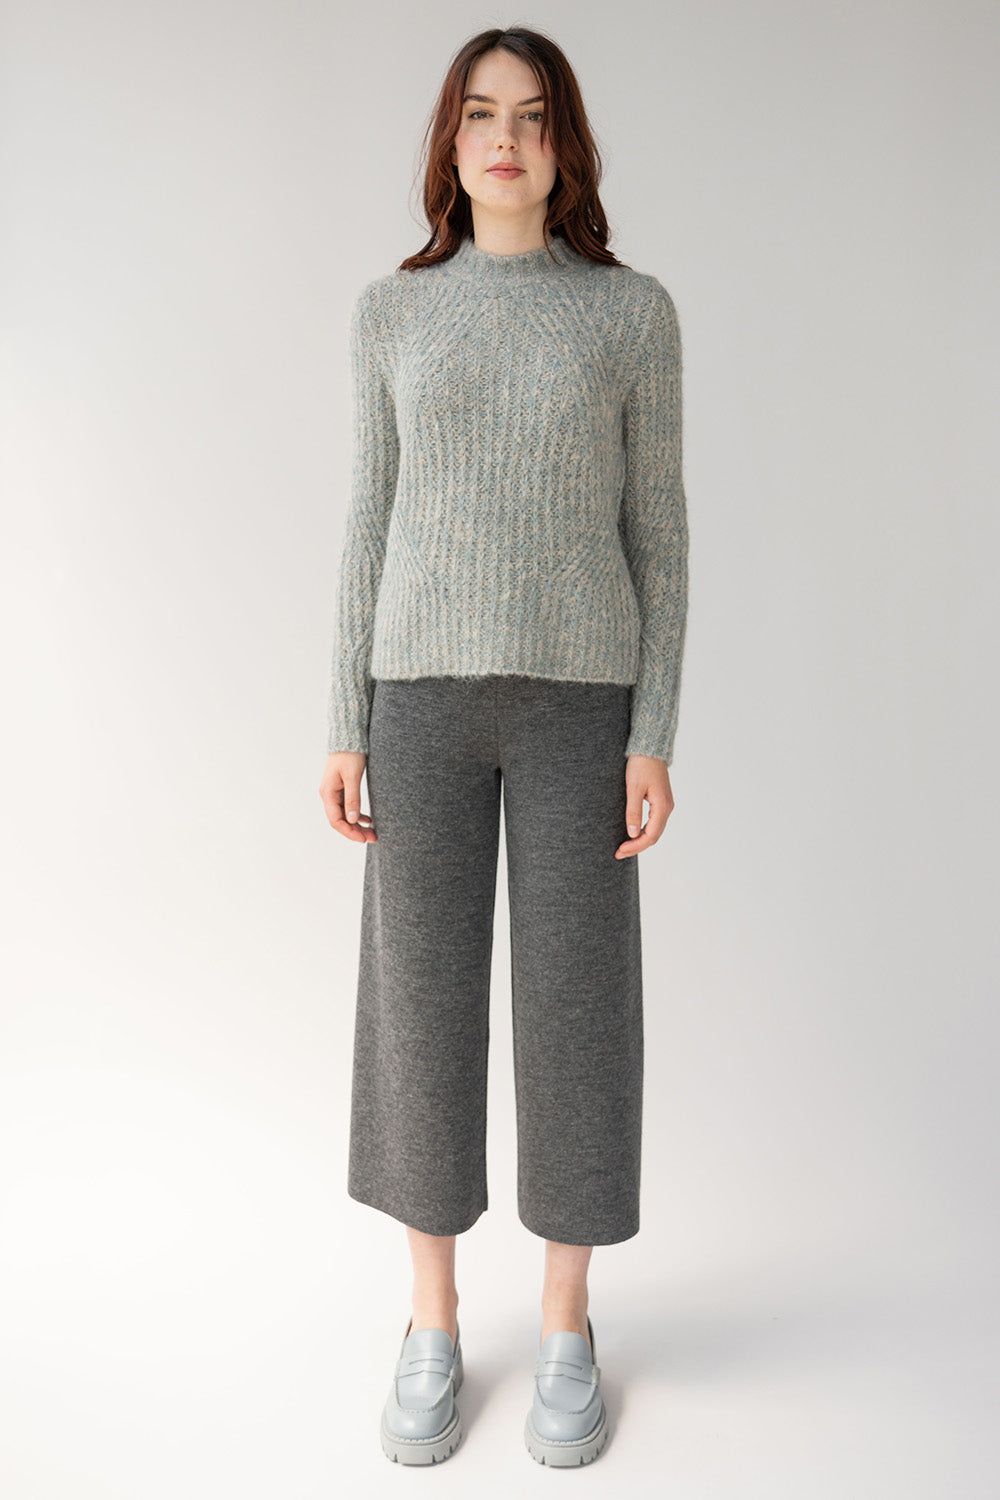 Head to toe grey outfit top is grey sweater bottoms are wide leg trousers made from responsibly sourced alpaca